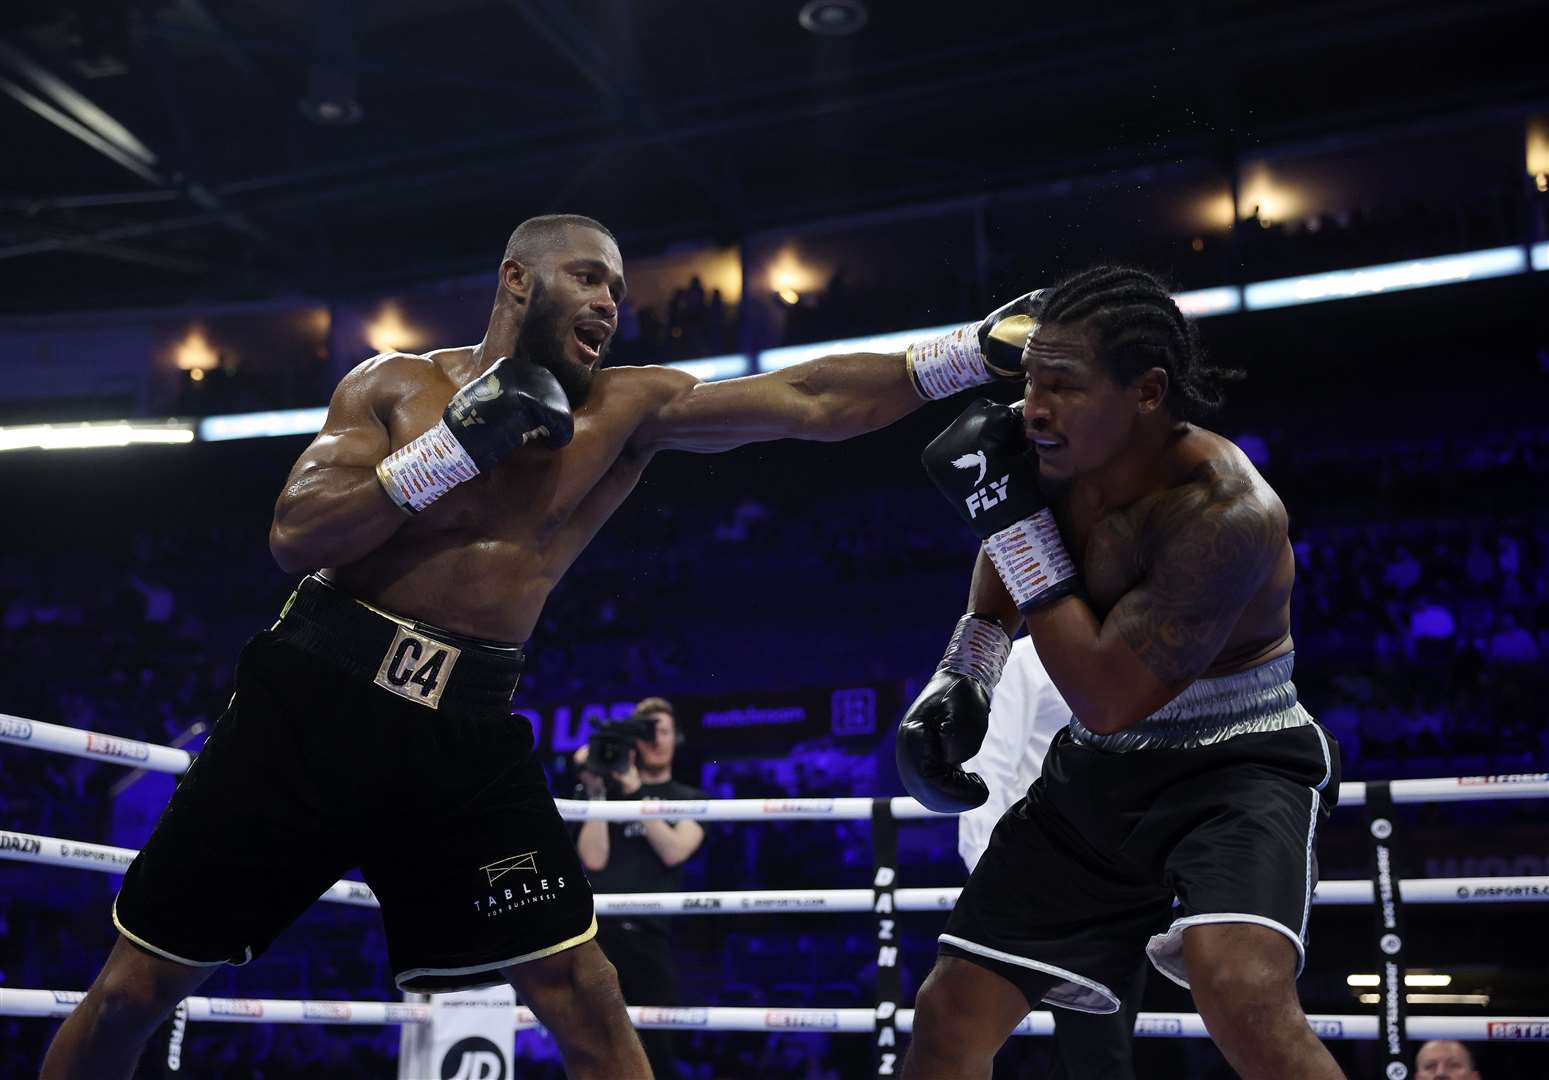 Cheavon Clarke beats Israel Duffus with a unanimous points decision in their cruiserweight contest Picture: Mark Robinson/Matchroom Boxing